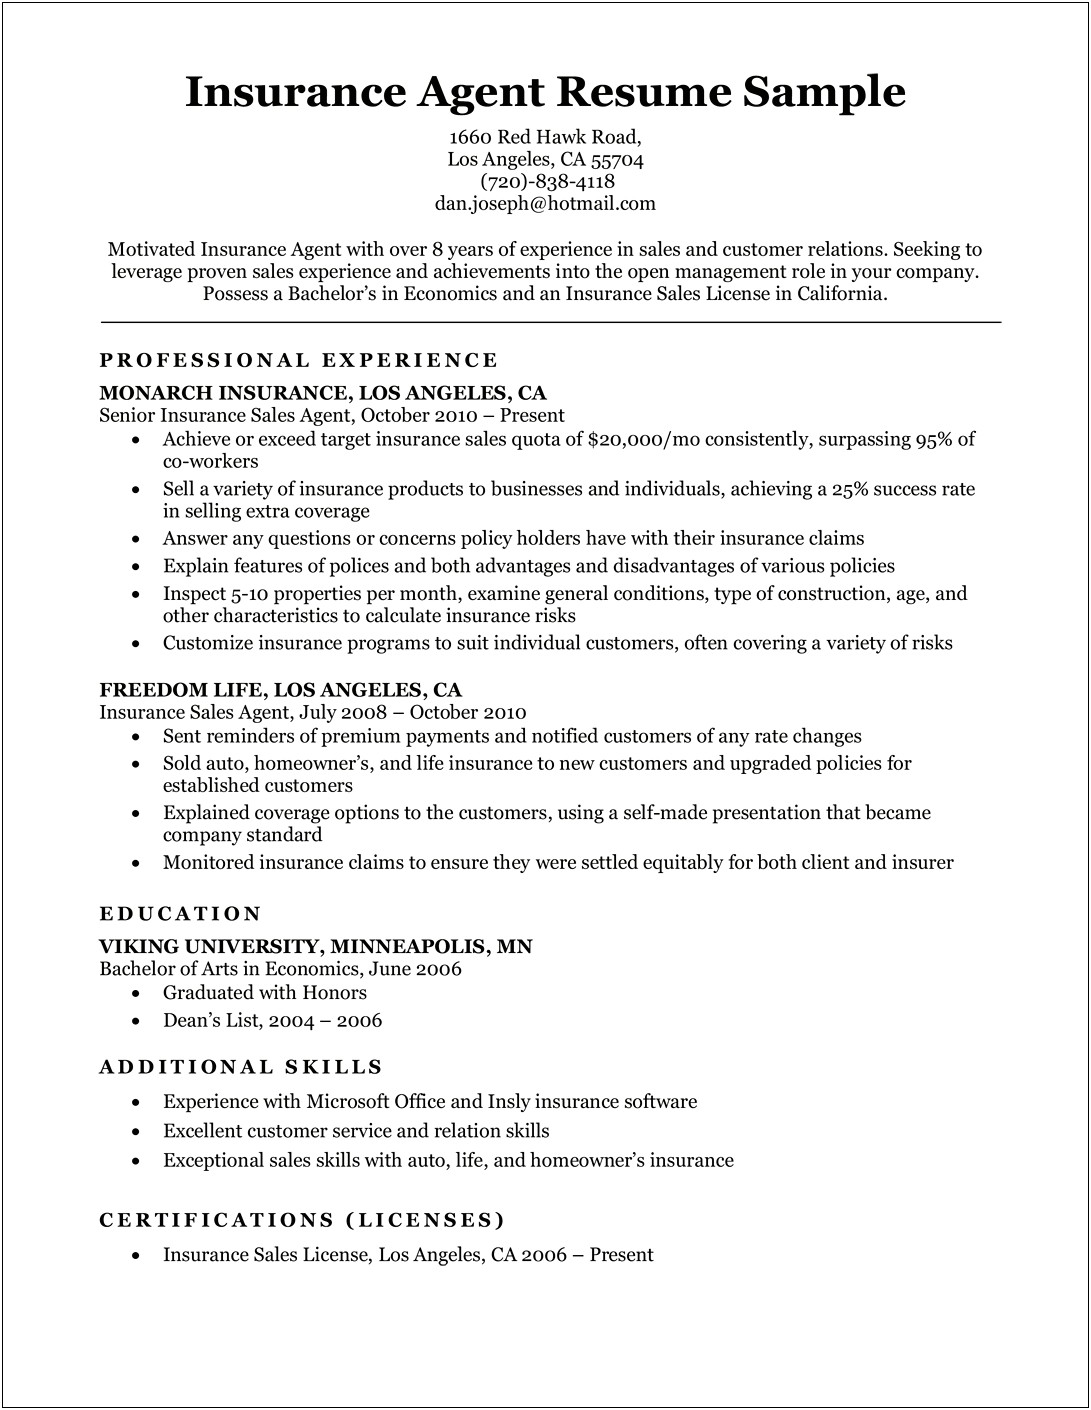 Resume Phrase Alternative To Manage Or Direct